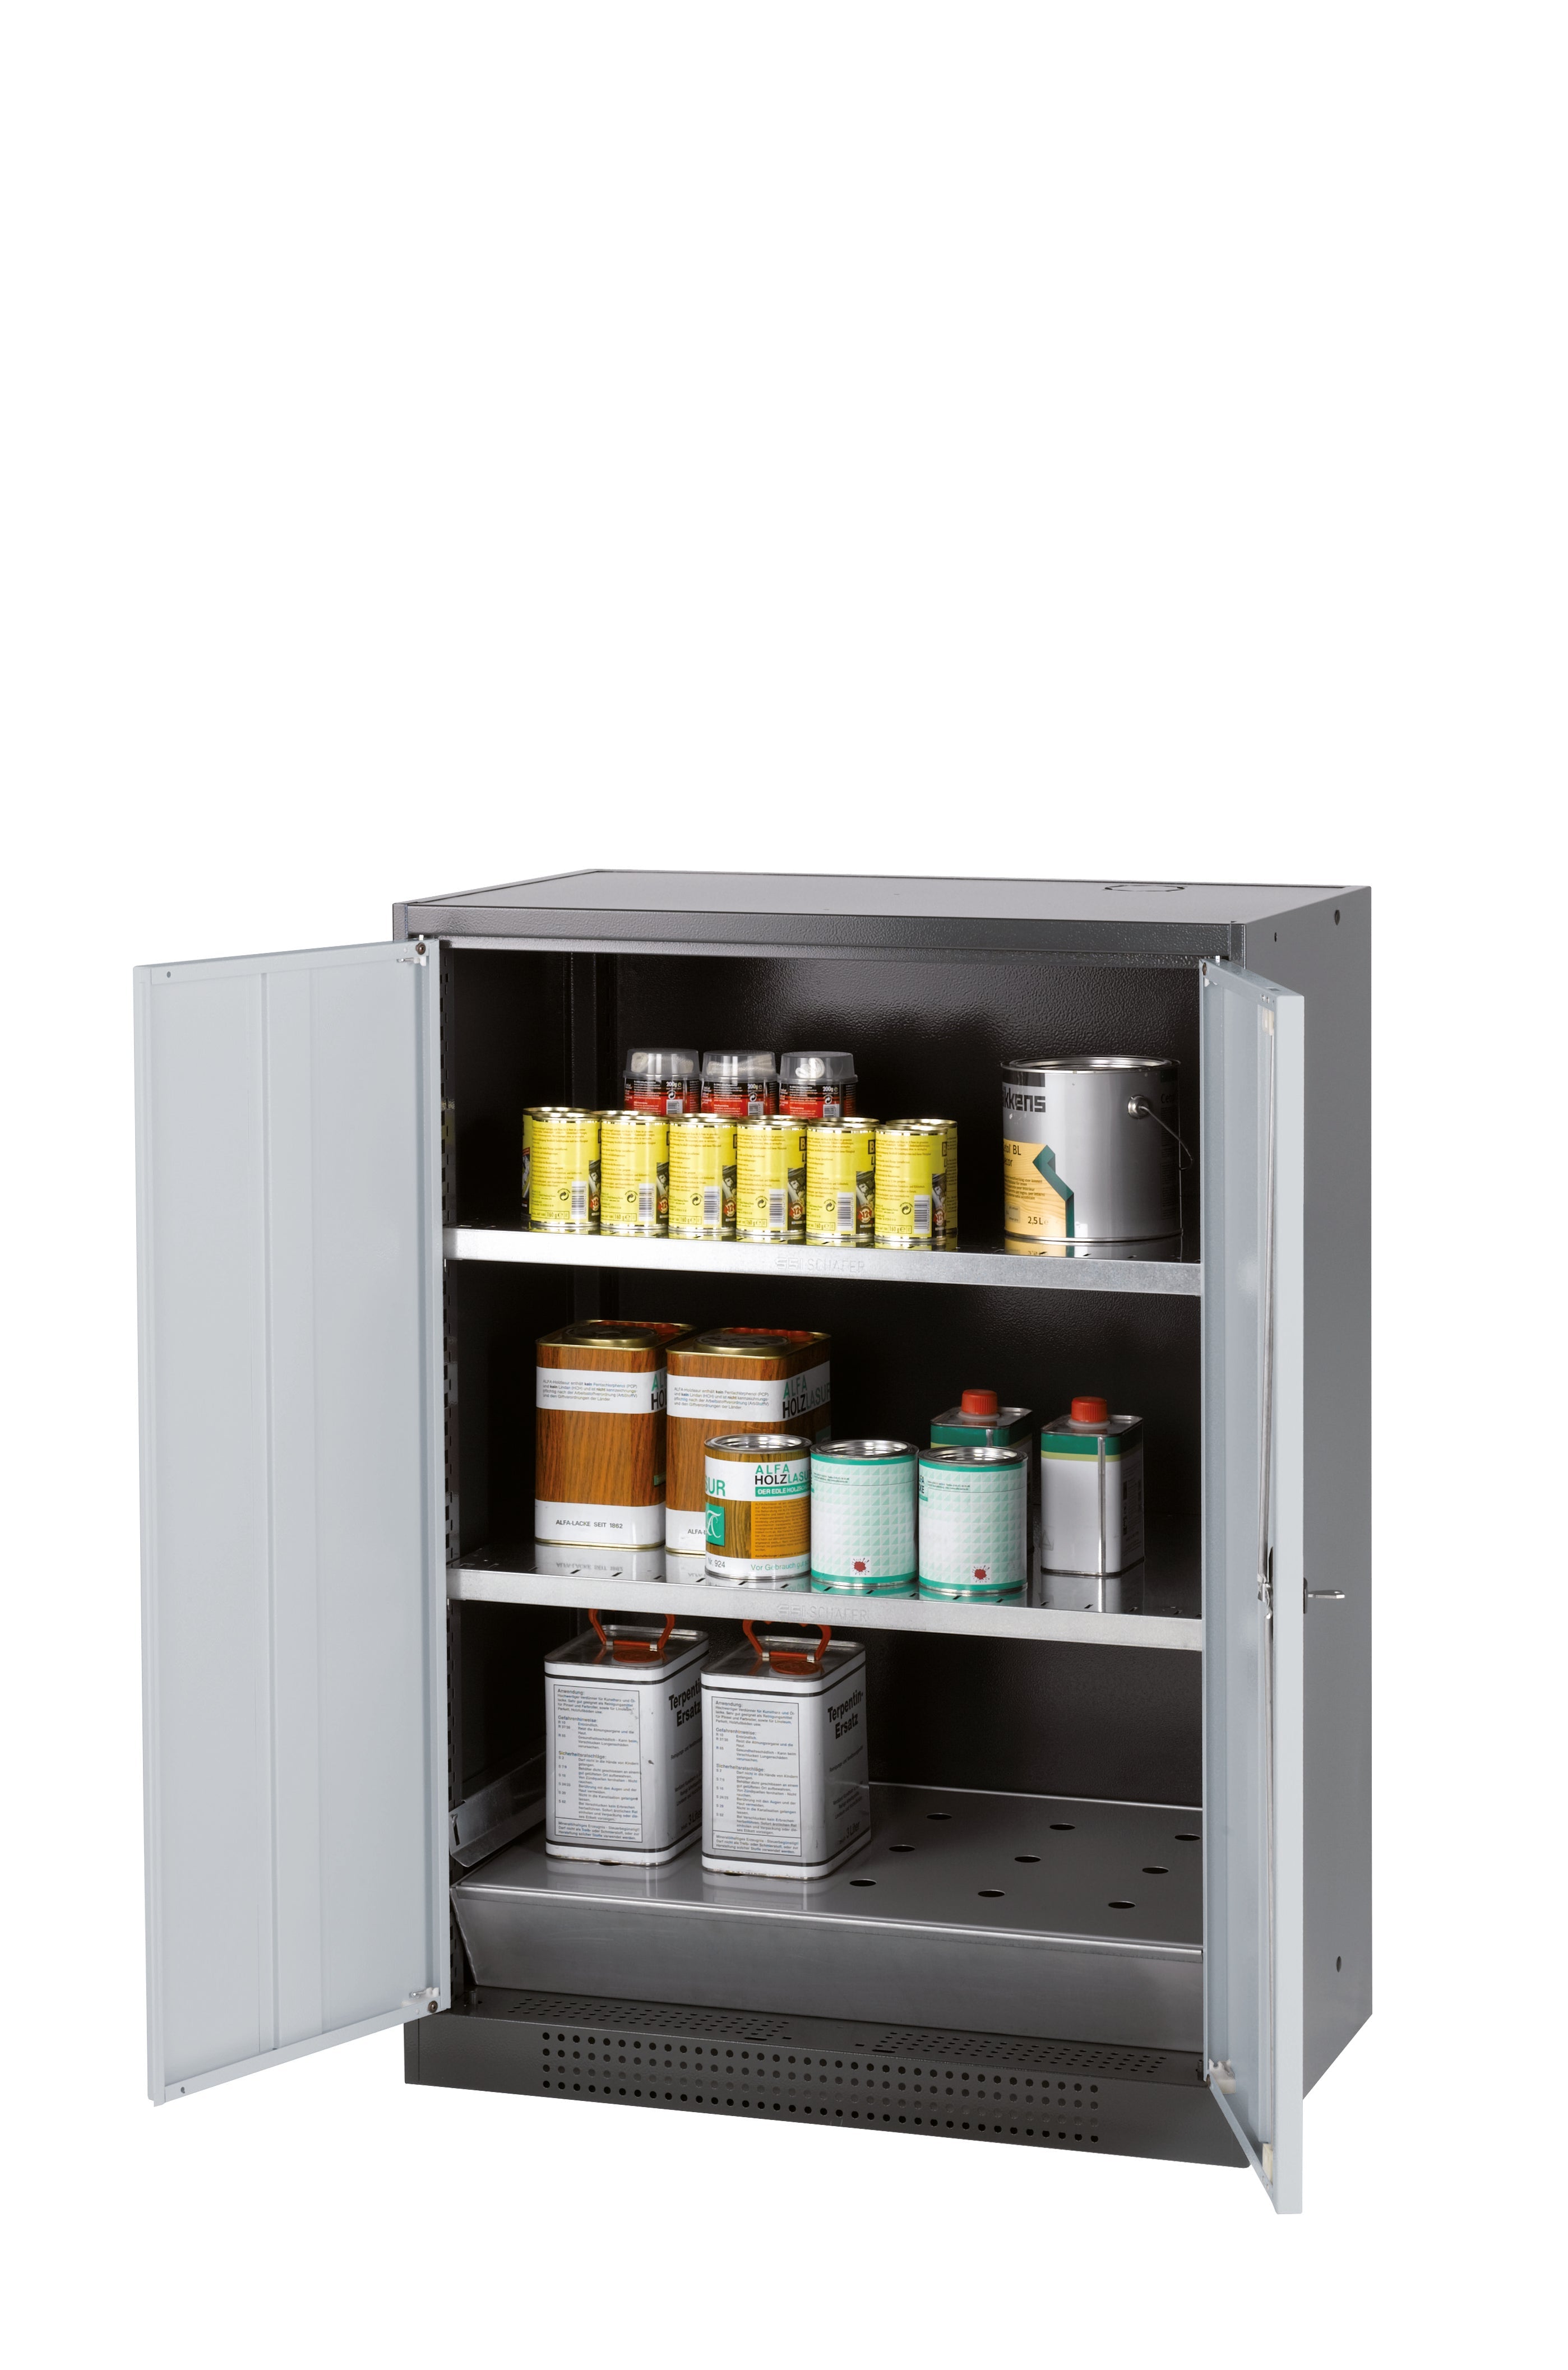 Chemical cabinet CS-CLASSIC model CS.110.081 in light gray RAL 7035 with 2x standard shelves (sheet steel)